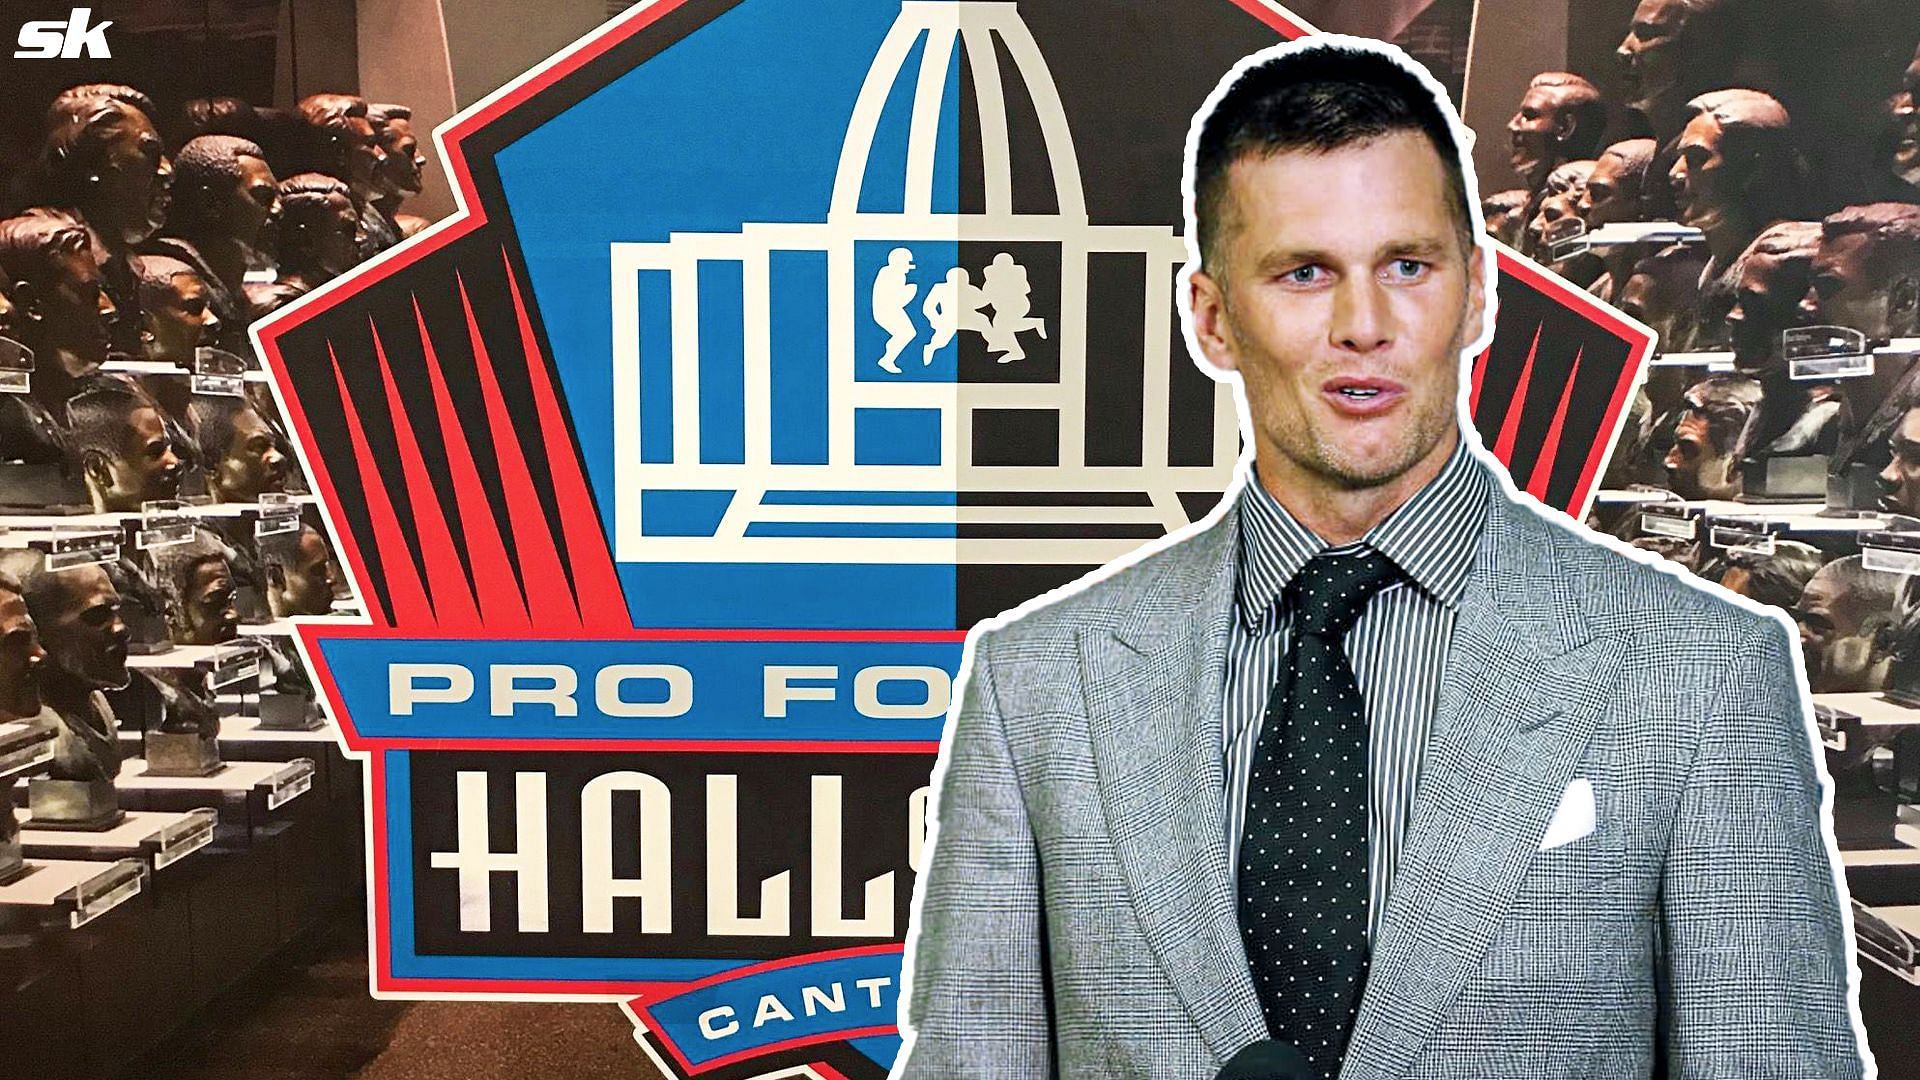 When will Tom Brady be inducted into the Pro Football Hall of Fame